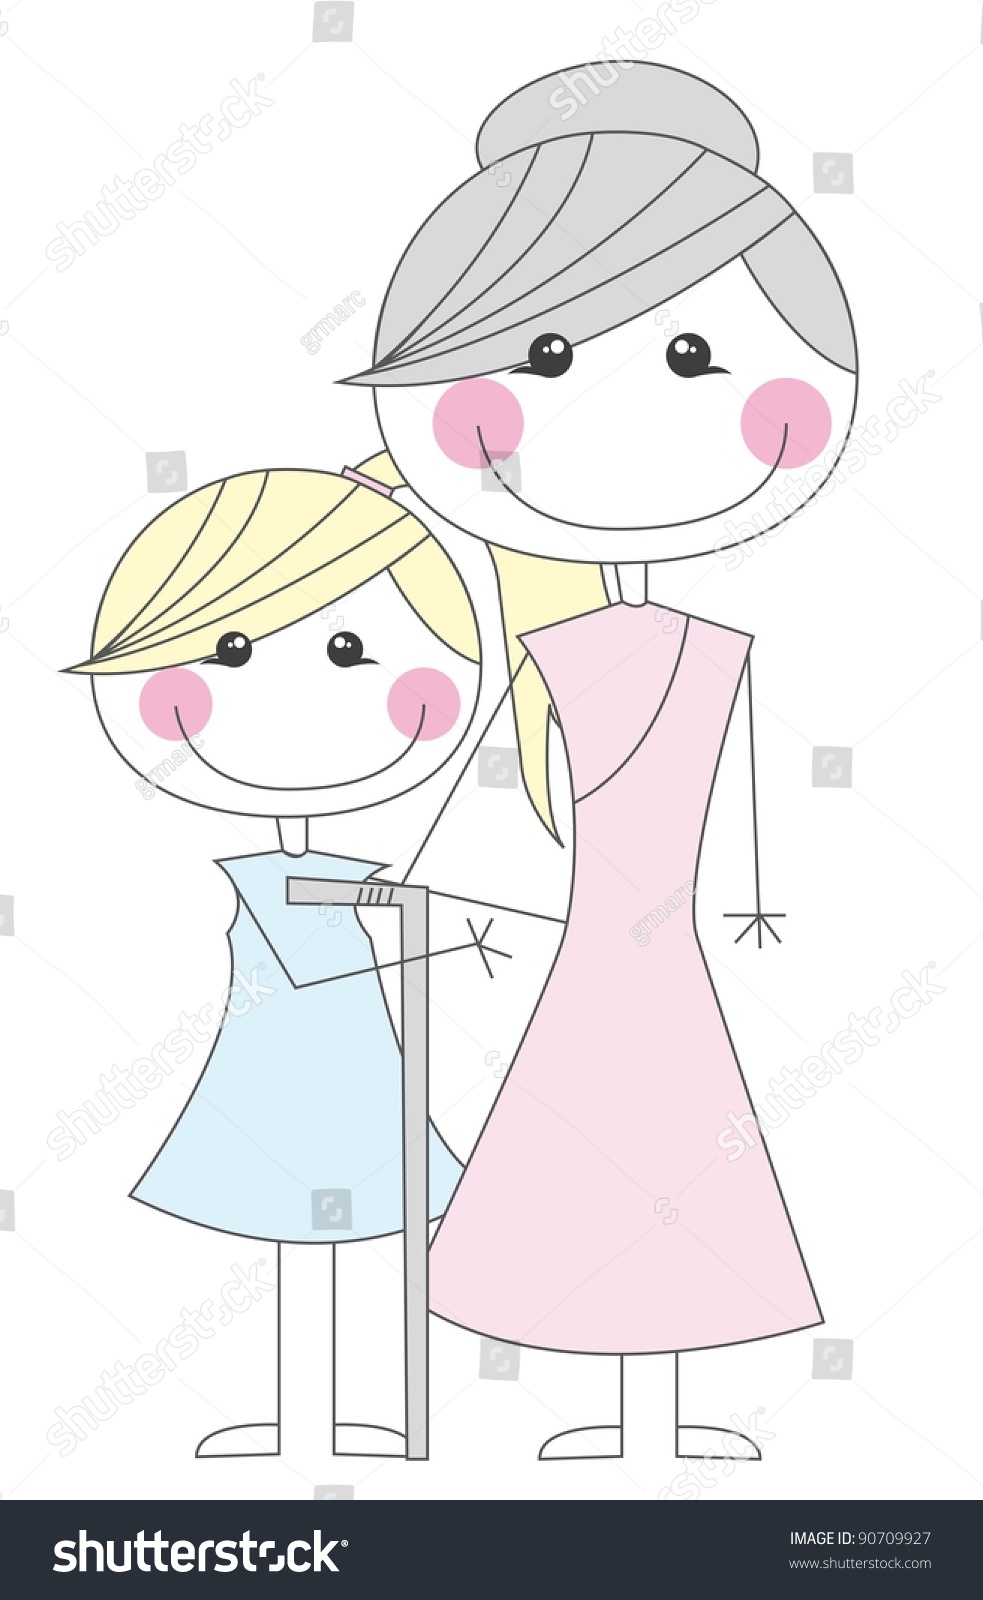 Granddaughter And Grandmother Cartoons Over White Background. Vector